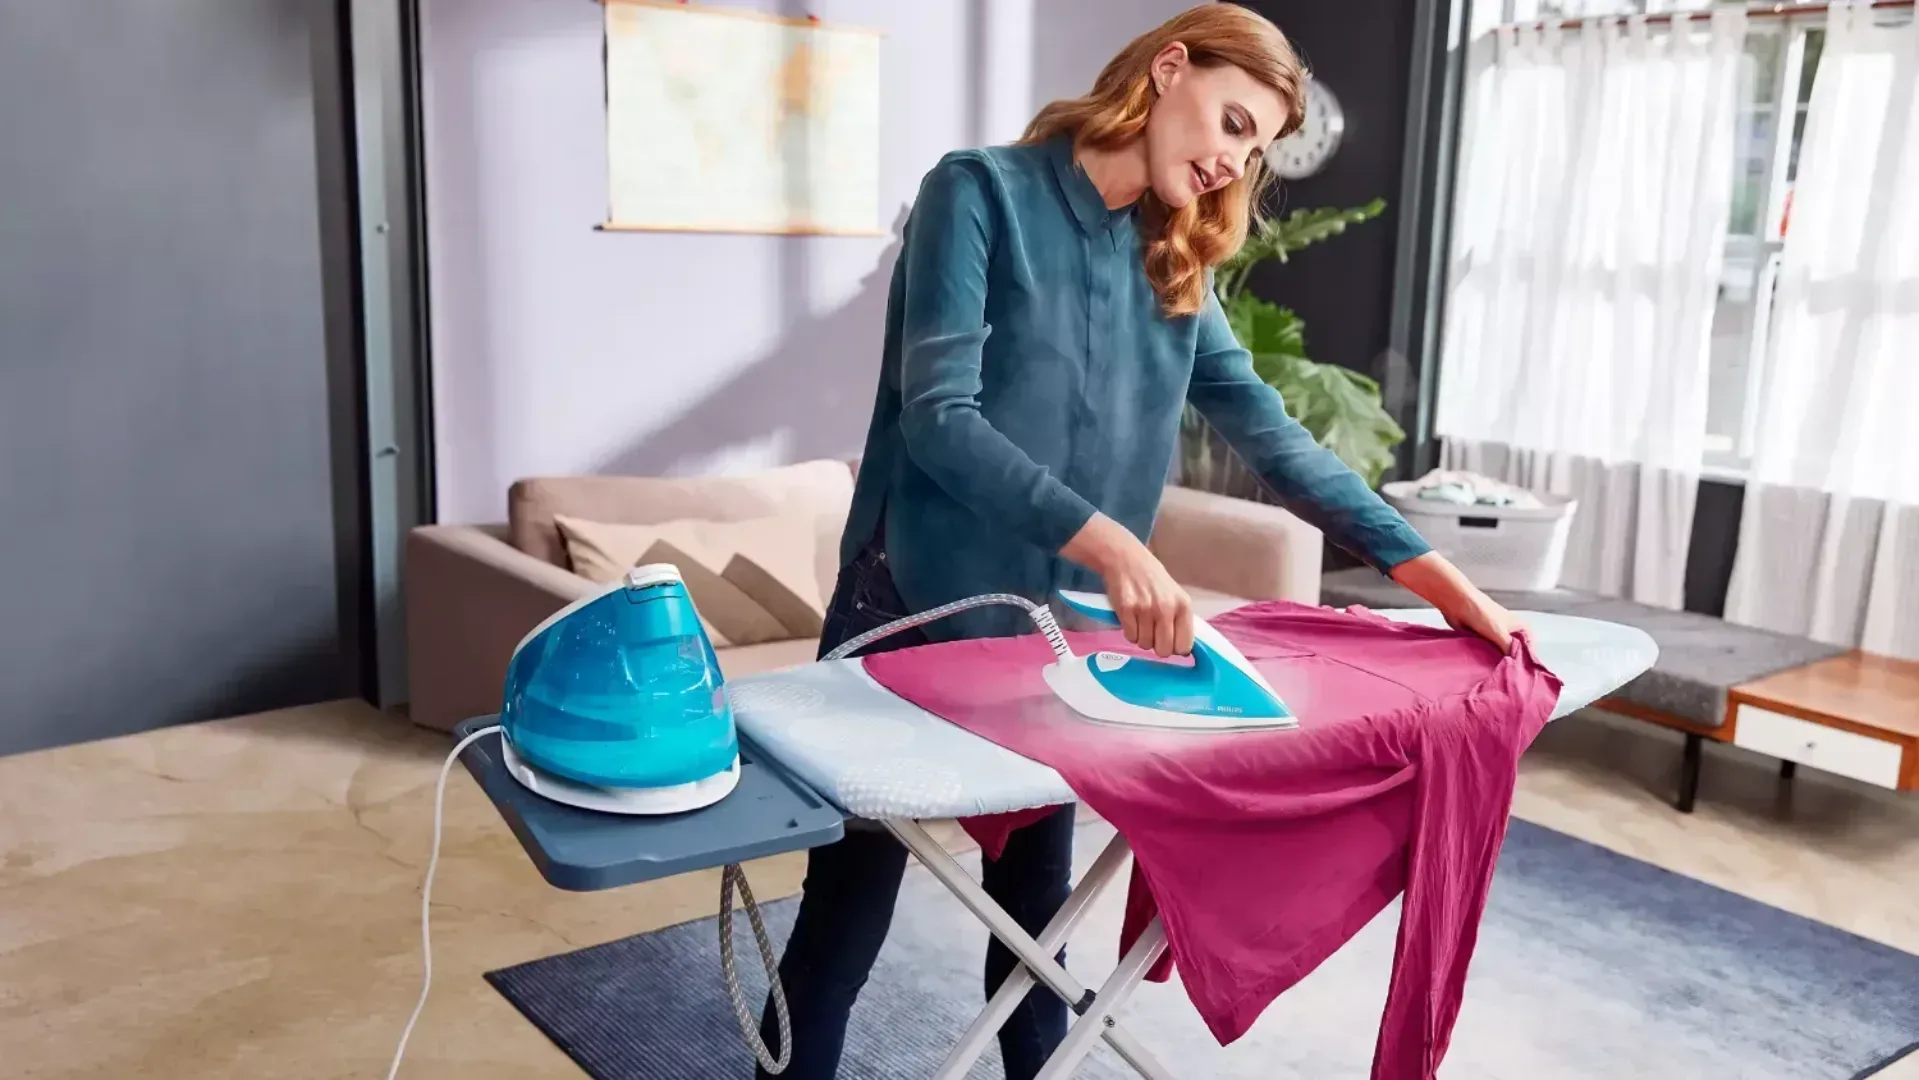 The Philips Perfect care iron being used by a blonde lady in a sparsely furnished room..